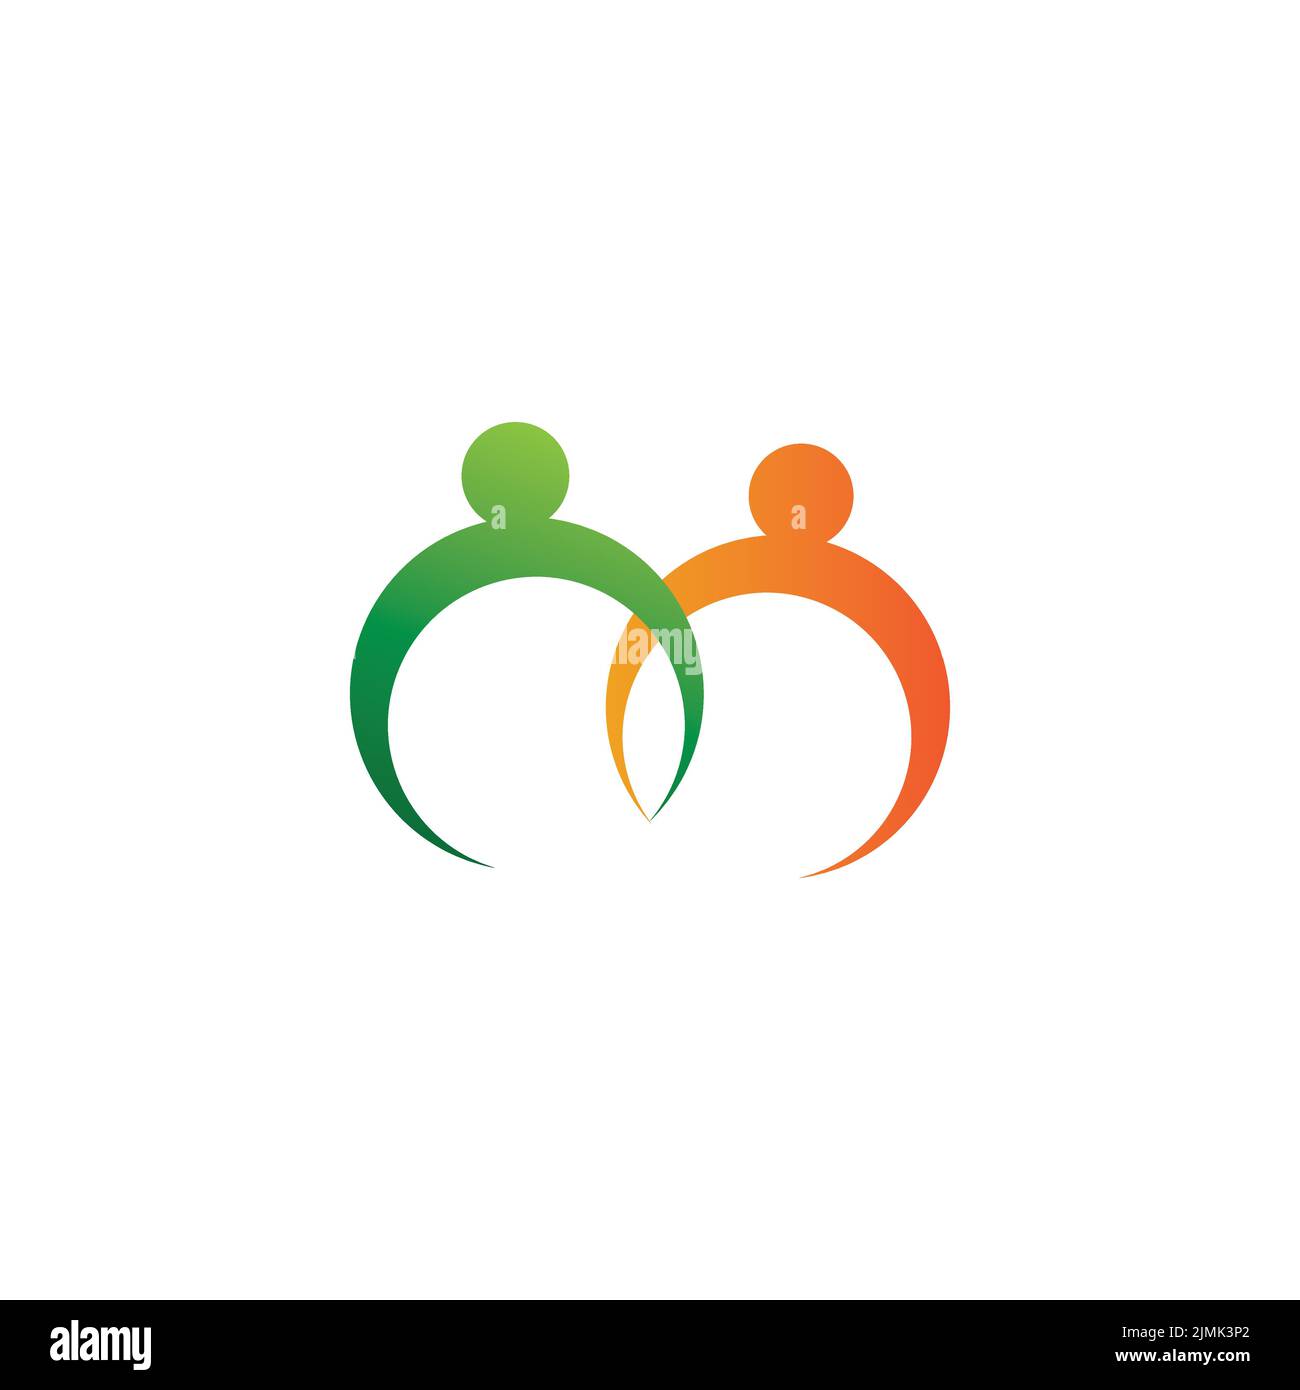 simple adoption and care community logo template vector icon Stock Vector